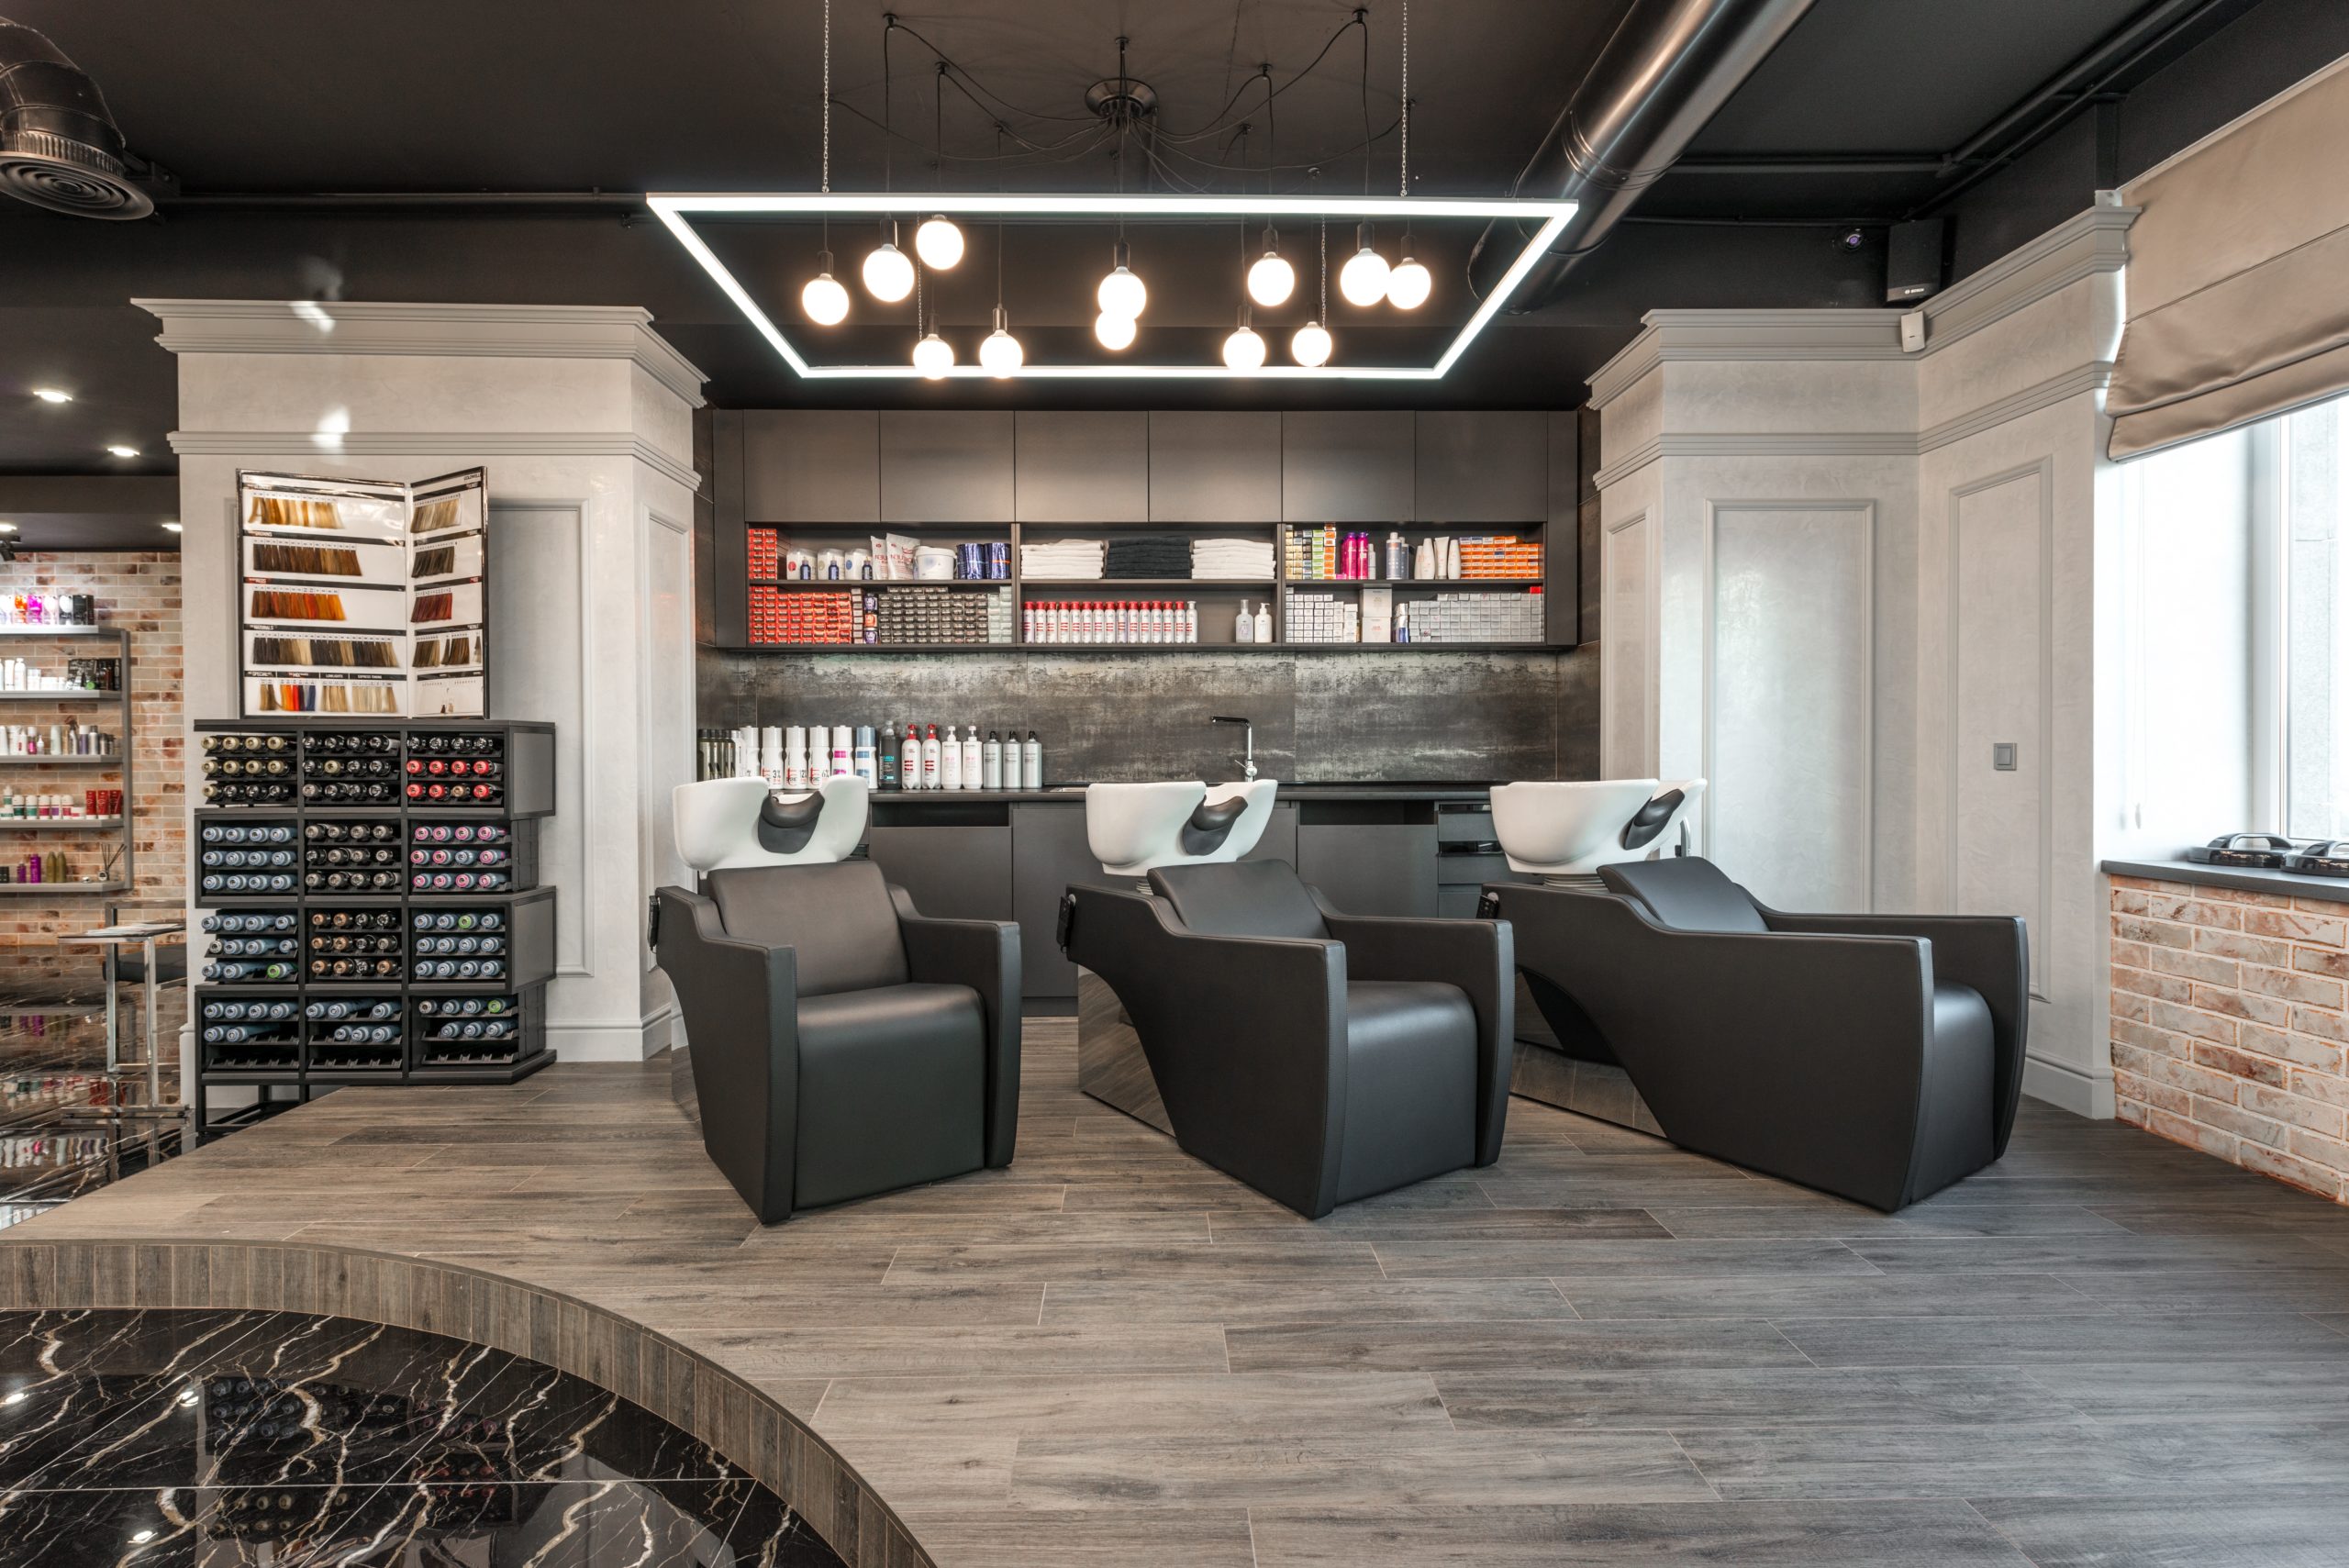 SOLD! Salon and Spa Business For Sale Edmonton, Ab Area